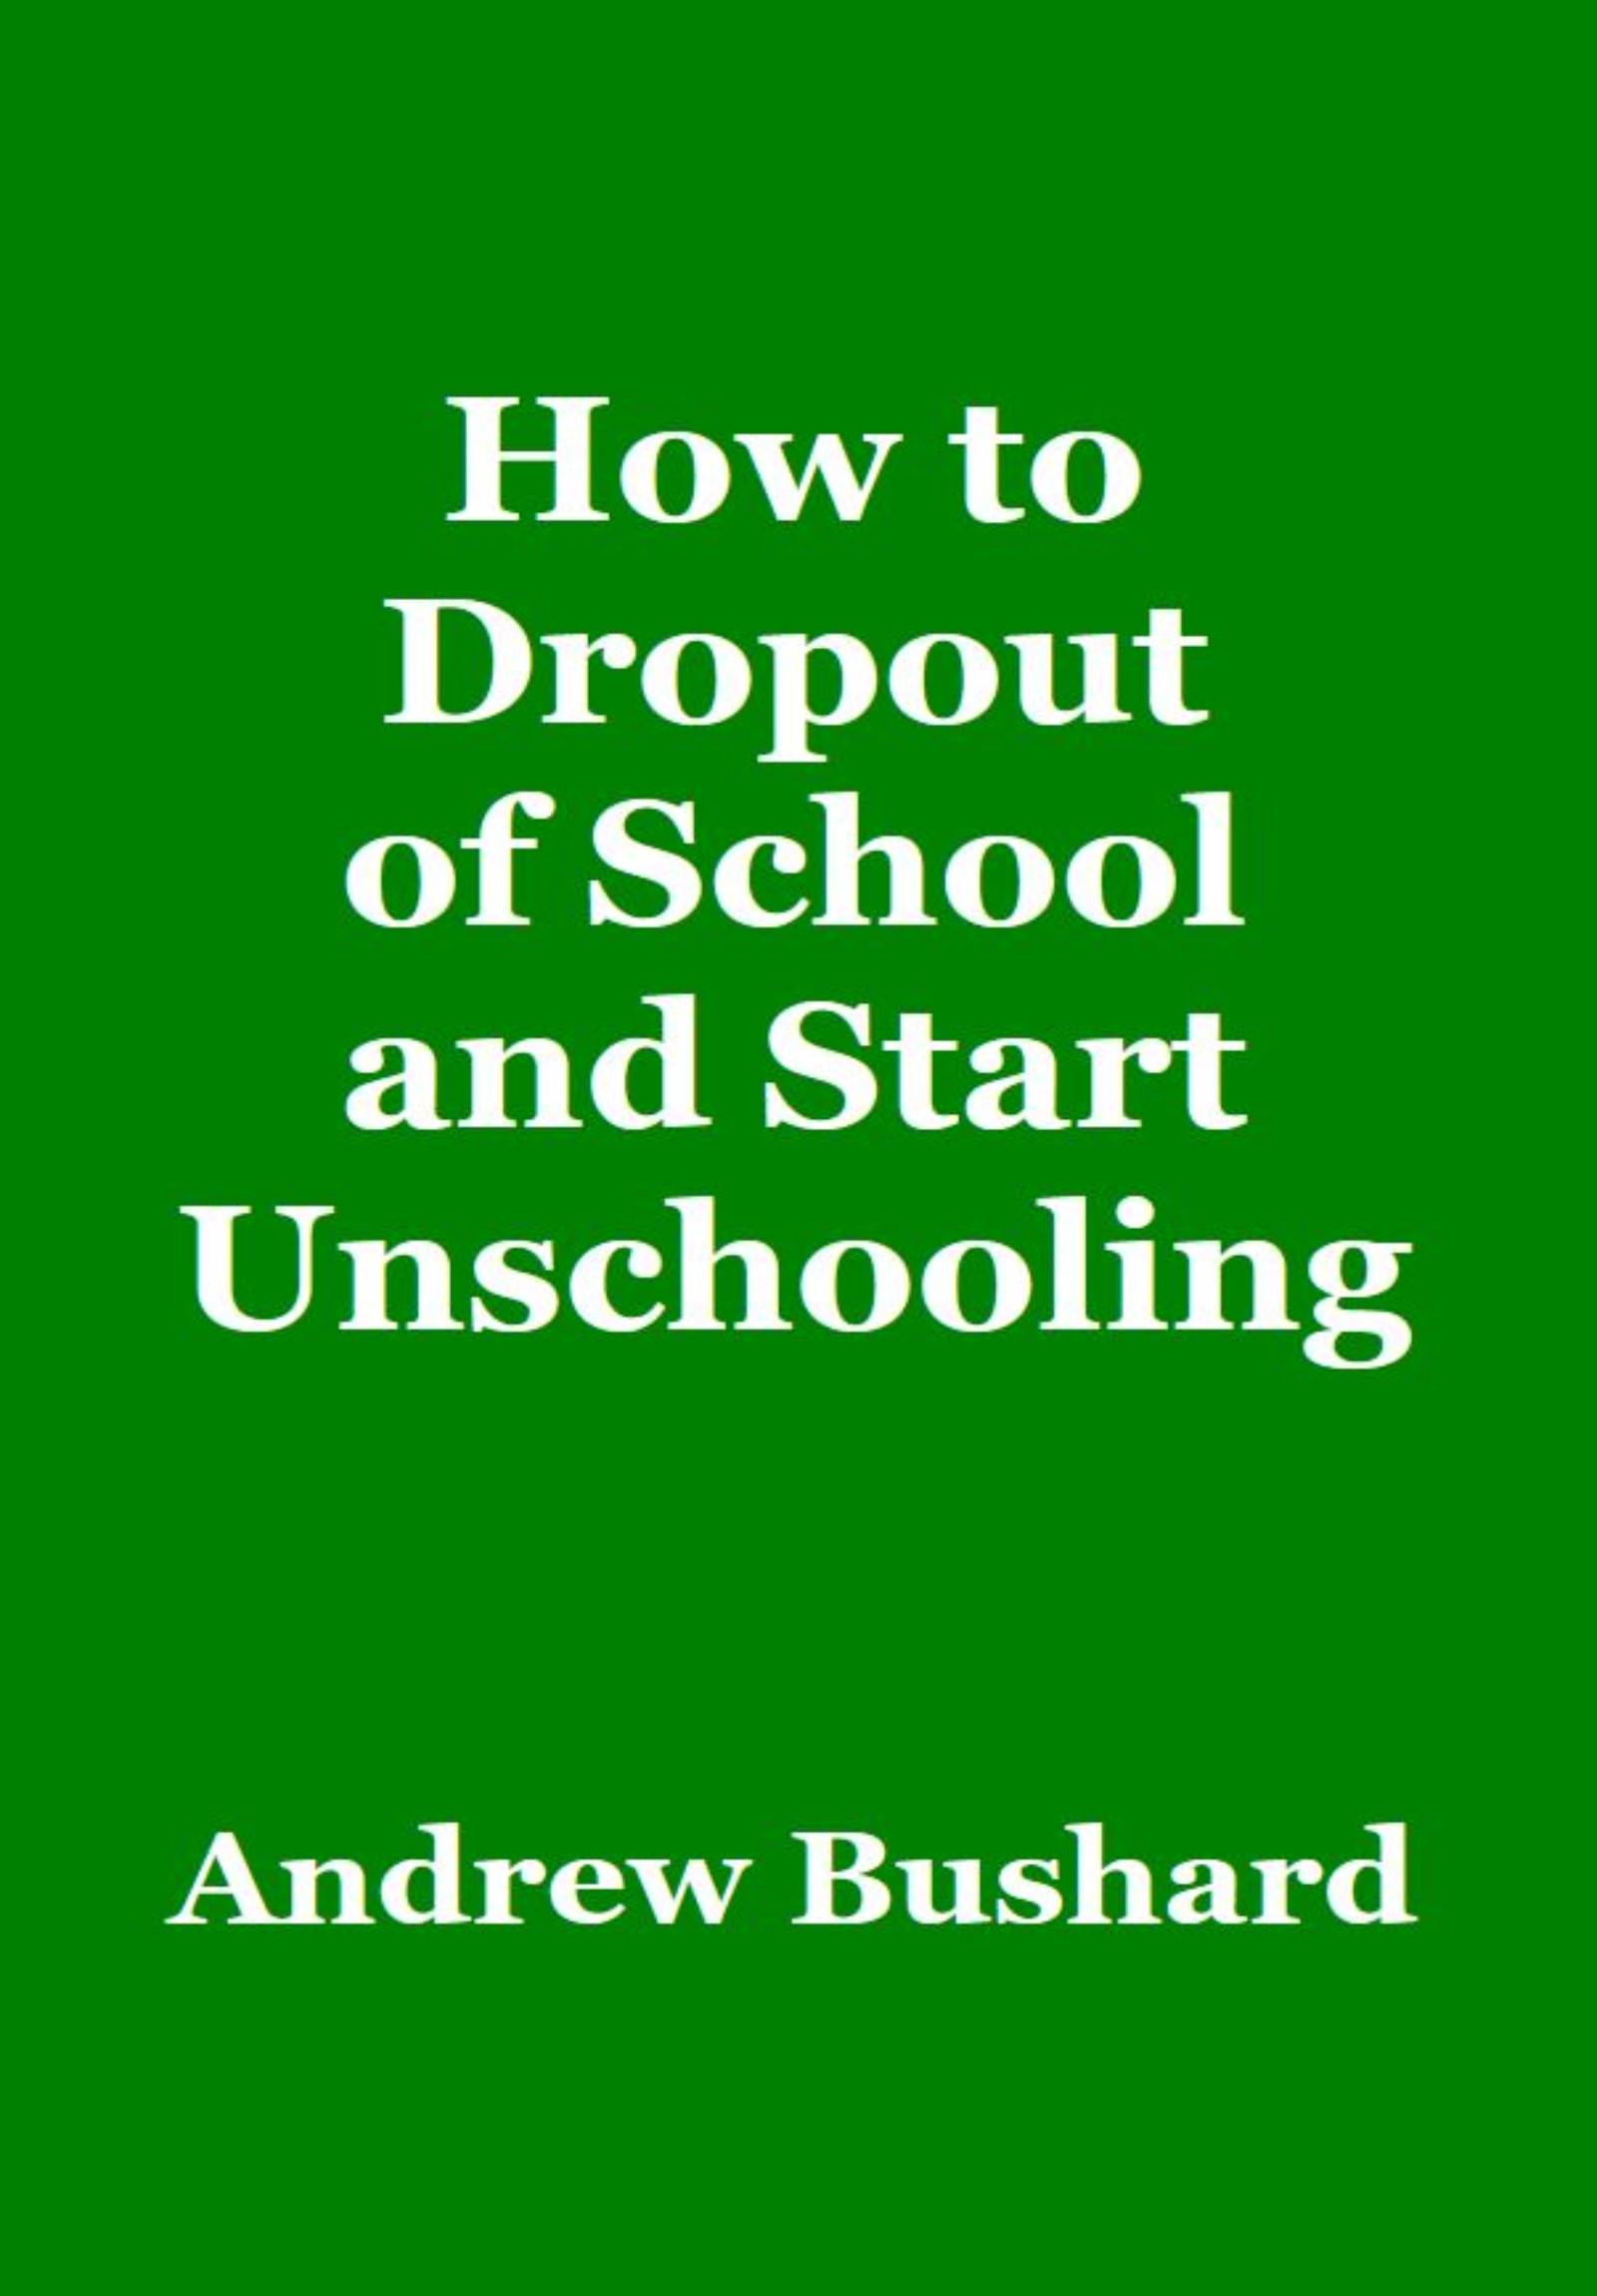 How to Dropout of School and Start Unschooling's featured image